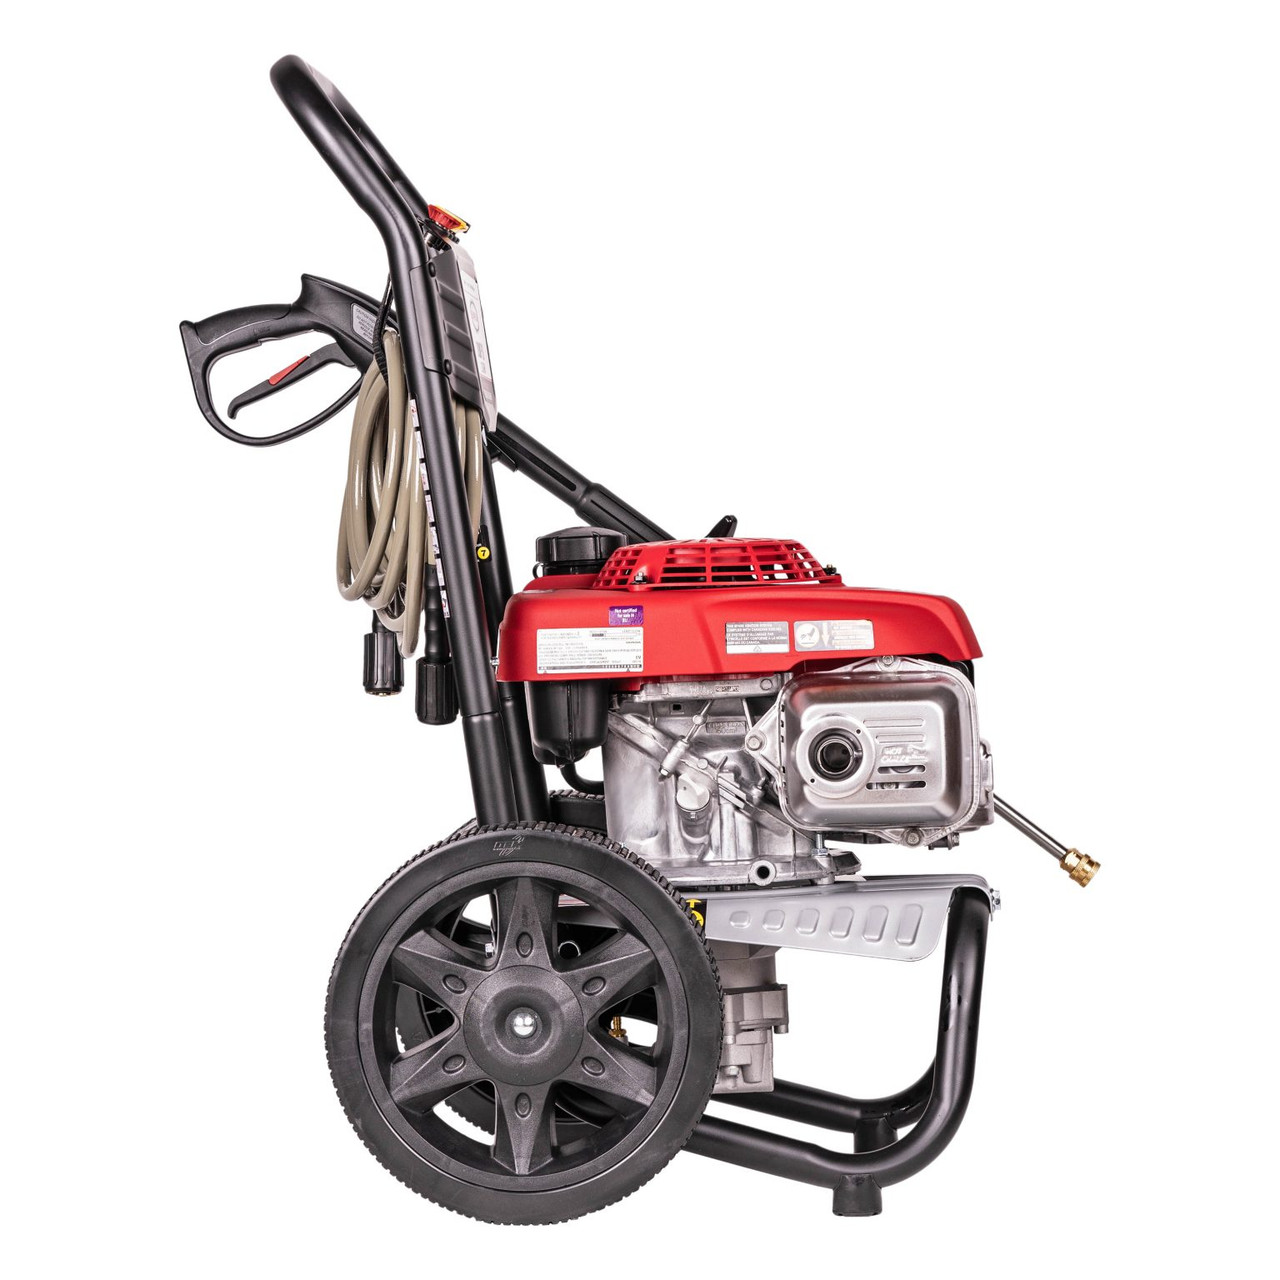 2800 PSI at 2.3 GPM HONDA GCV160 with OEM Technologies? Axial Cam Pump Cold Water Premium Residential Gas Pressure Washer MS60773-S